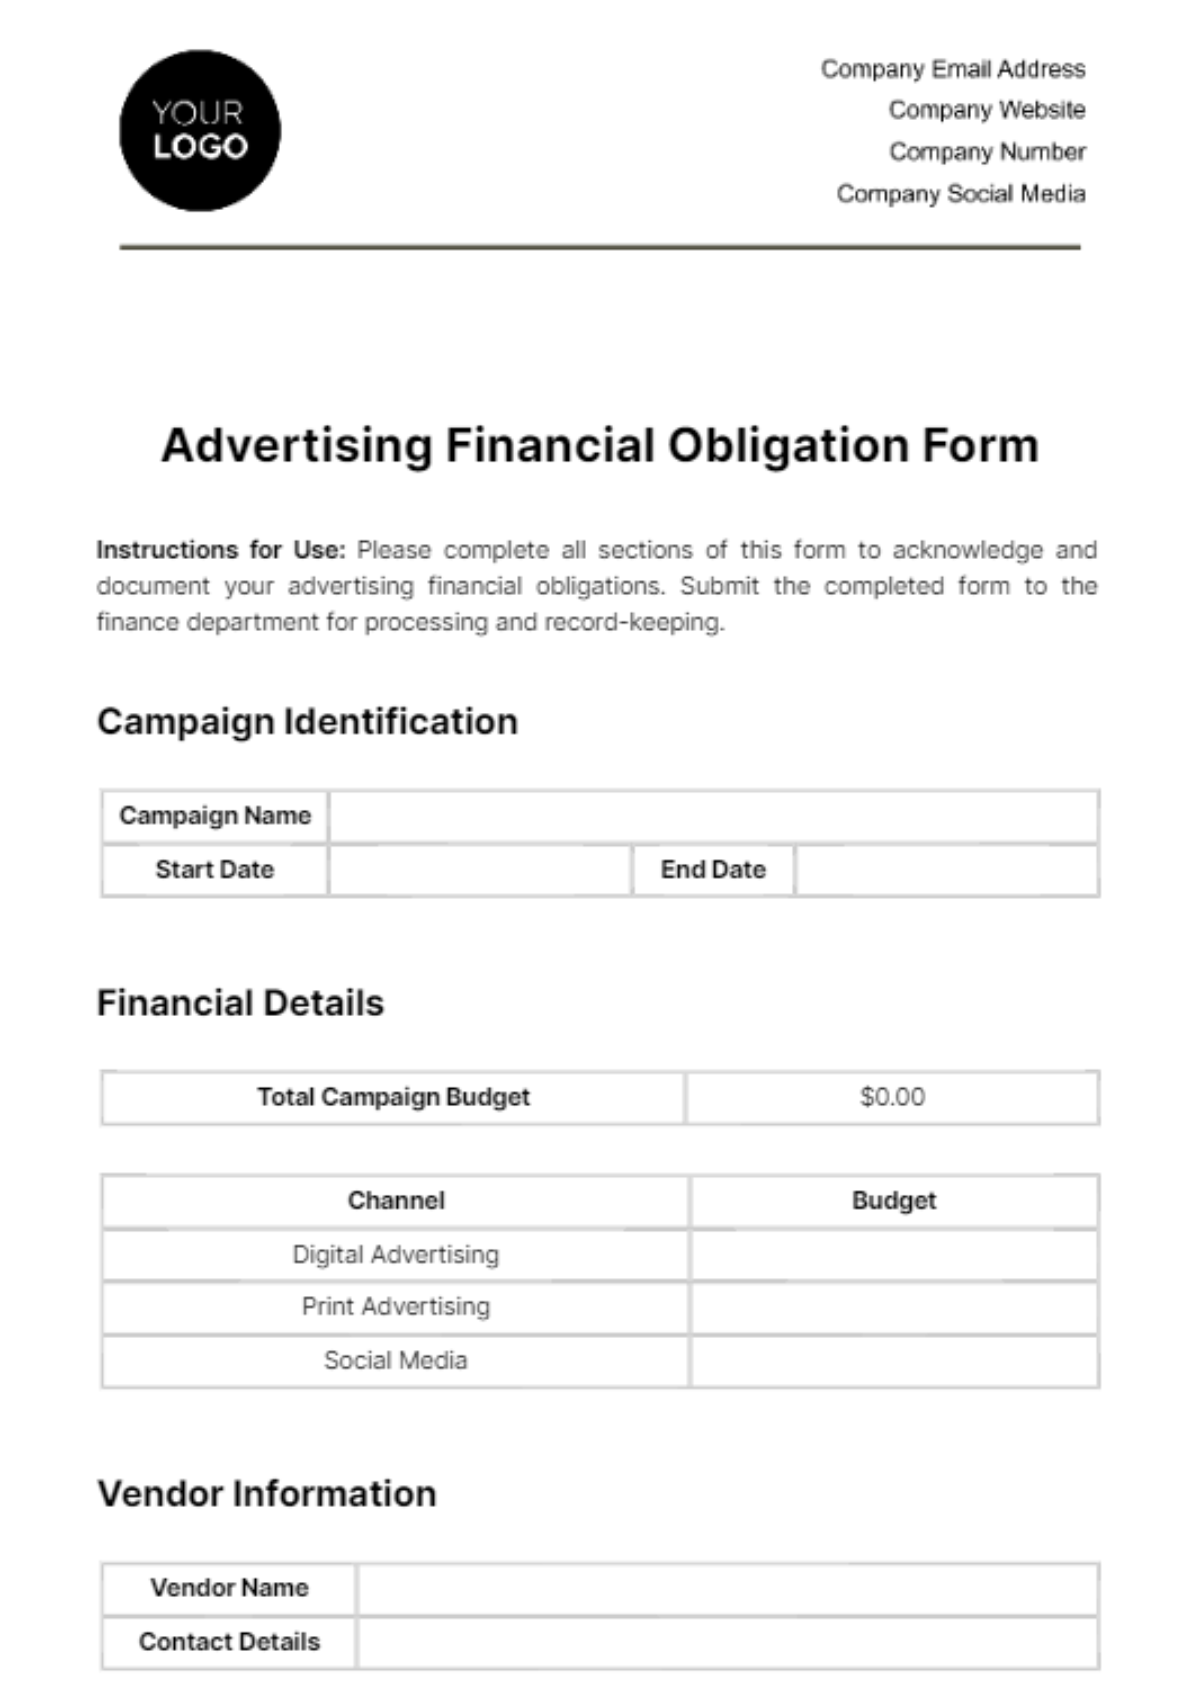 Free Advertising Financial Obligation Form Template